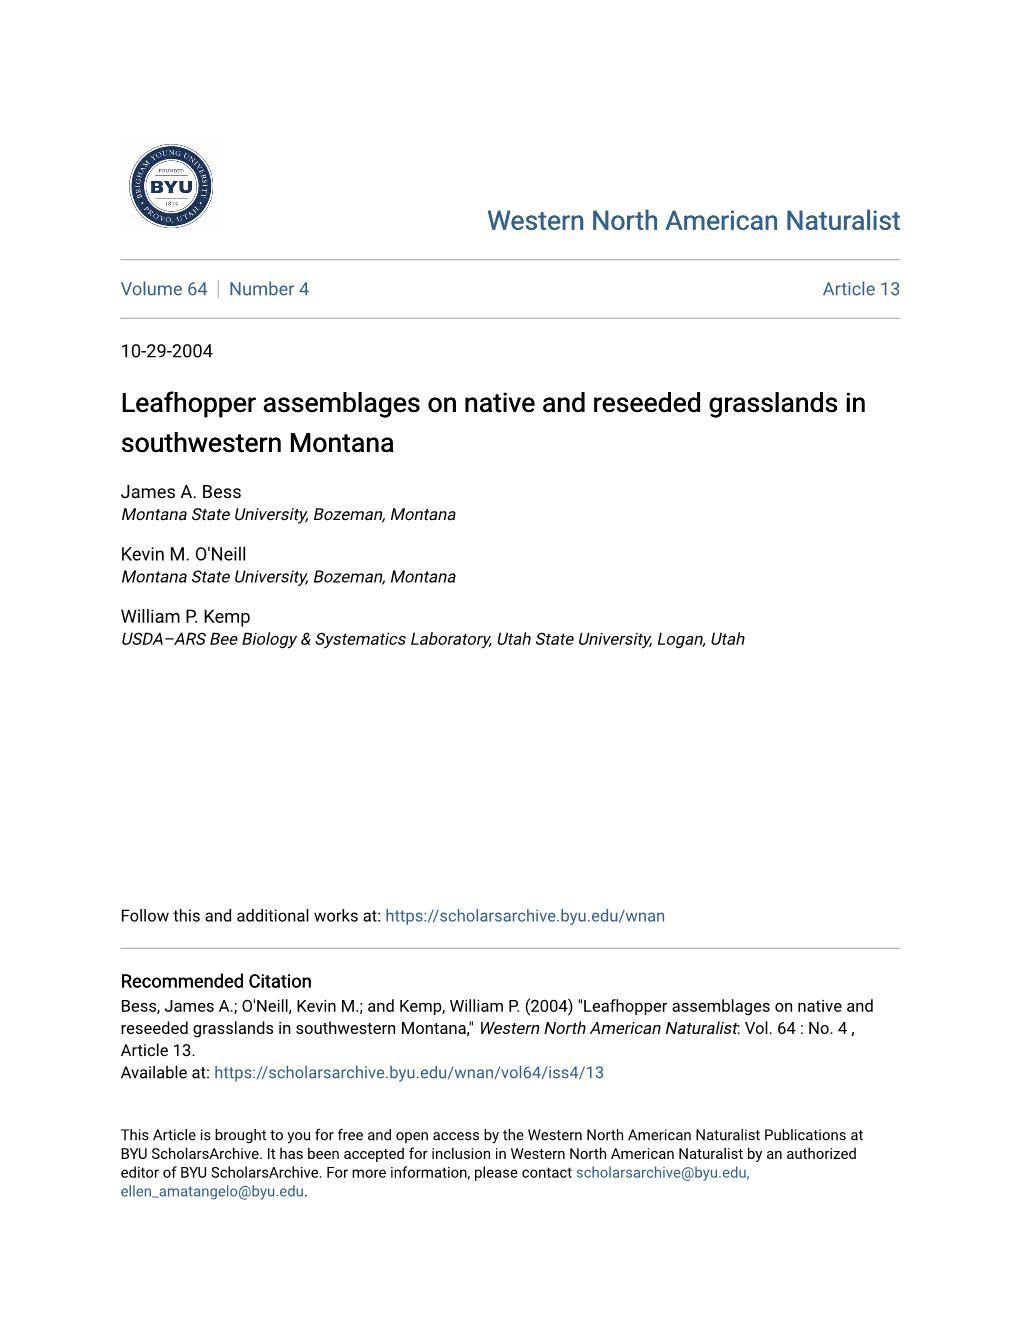 Leafhopper Assemblages on Native and Reseeded Grasslands in Southwestern Montana